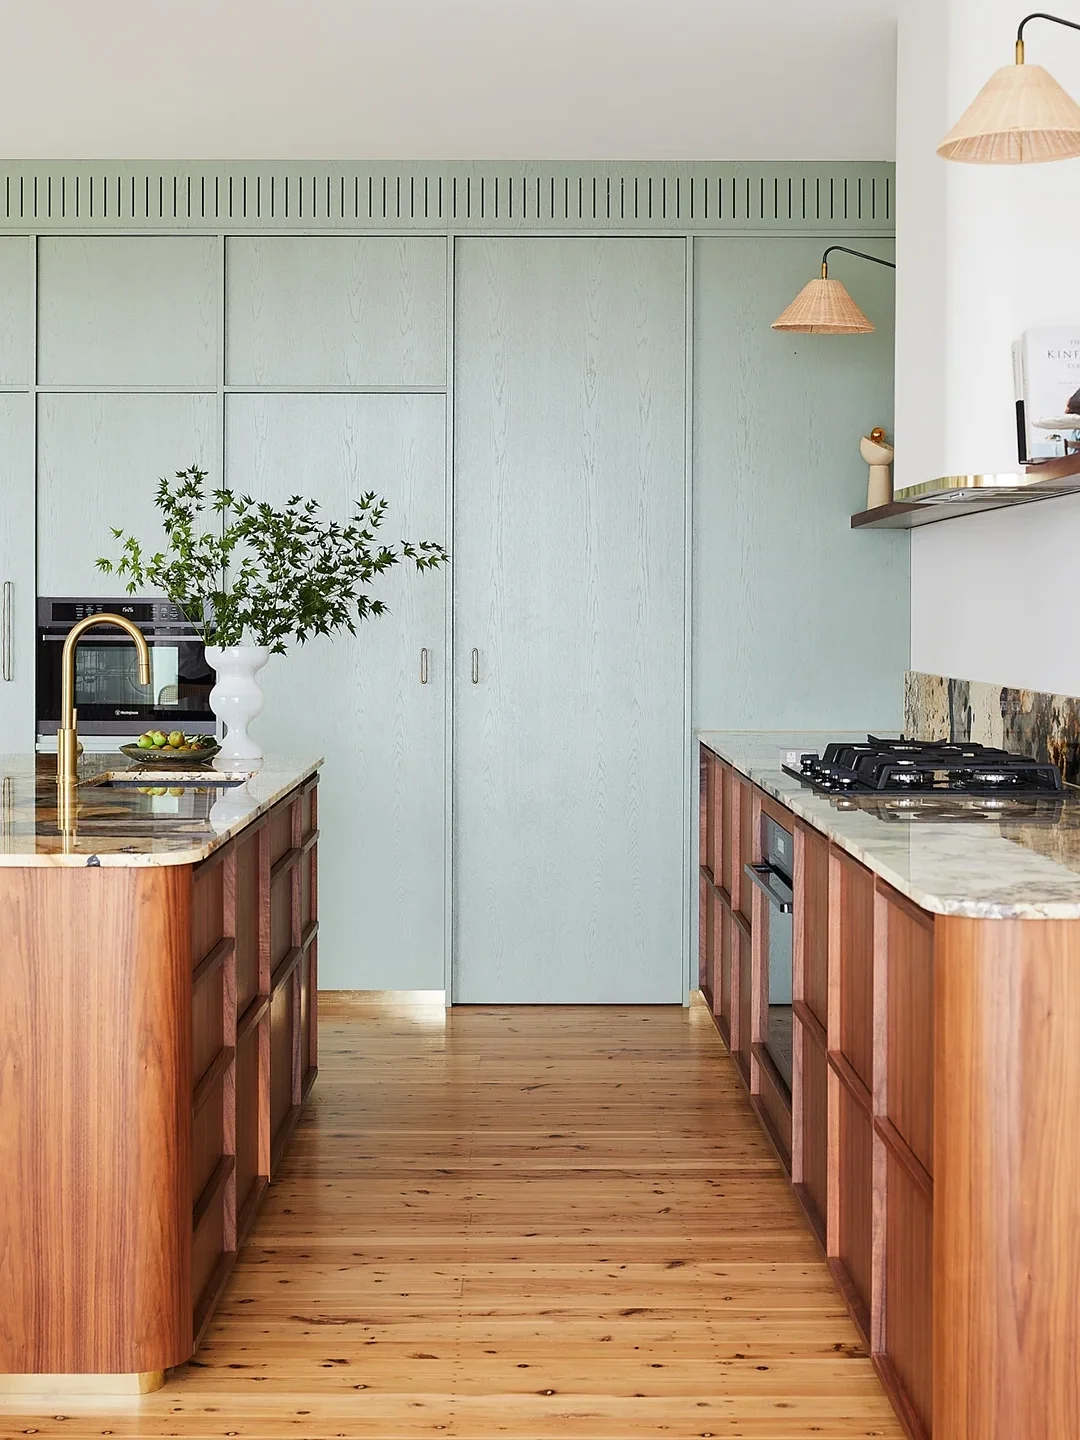 Kitchen with wood cabinets and island, and sage green cupboards along back wall. 